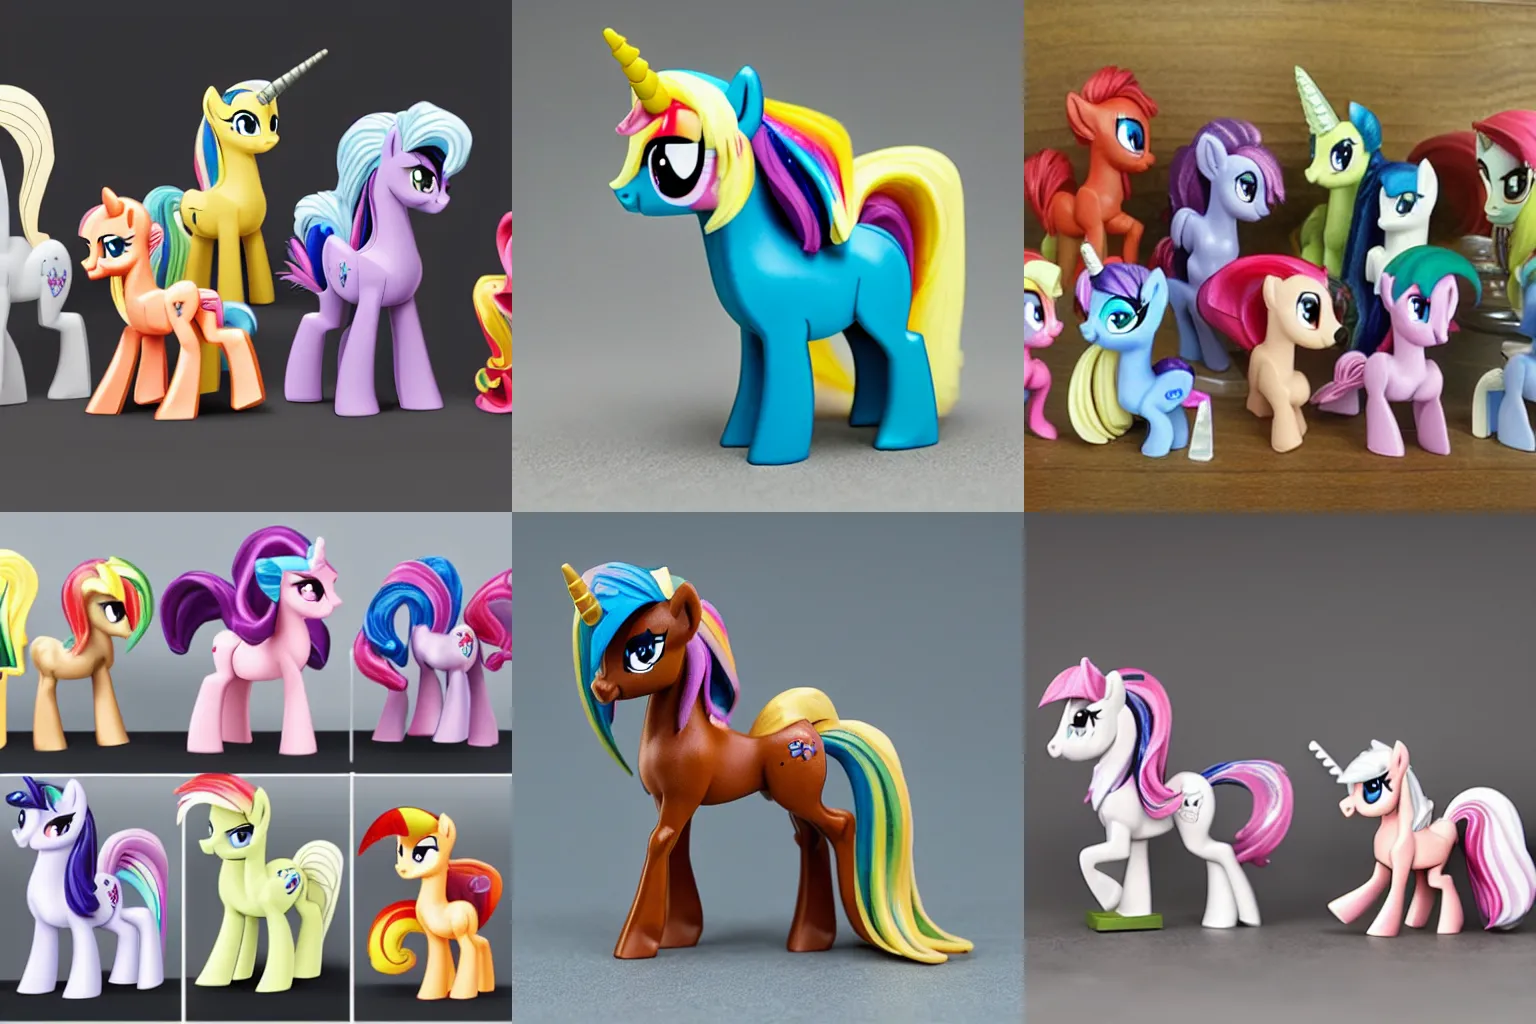 Prompt: If My Little Pony figurines were made of wood instead of plastic